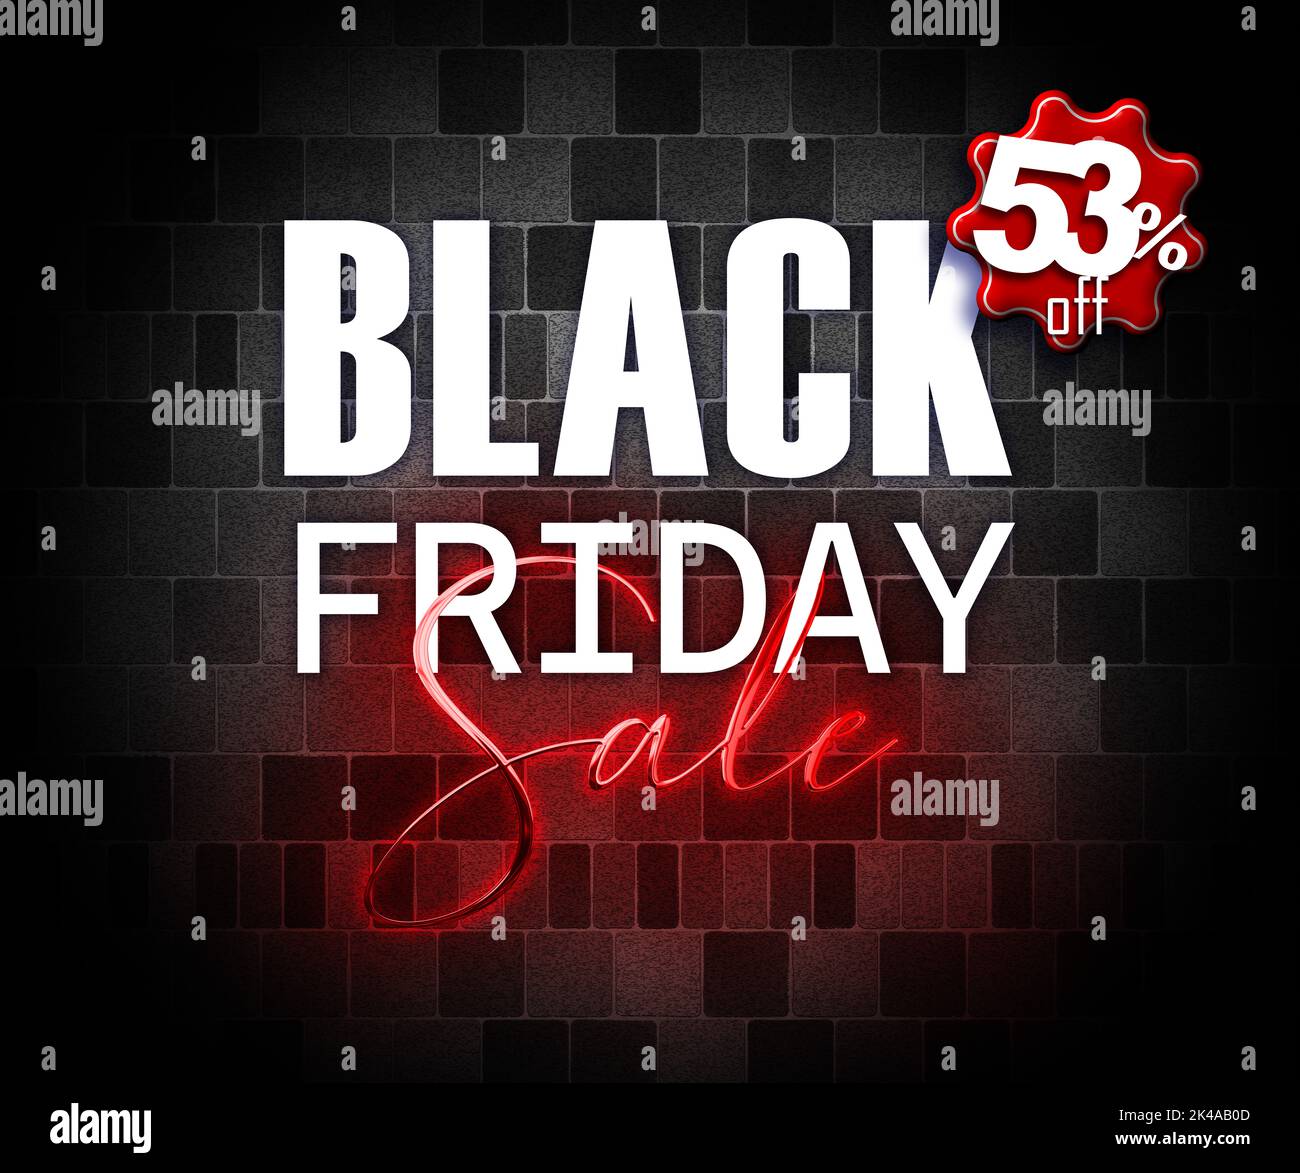 illustration with 3d elements black friday promotion banner 53 percent off sales increase Stock Photo